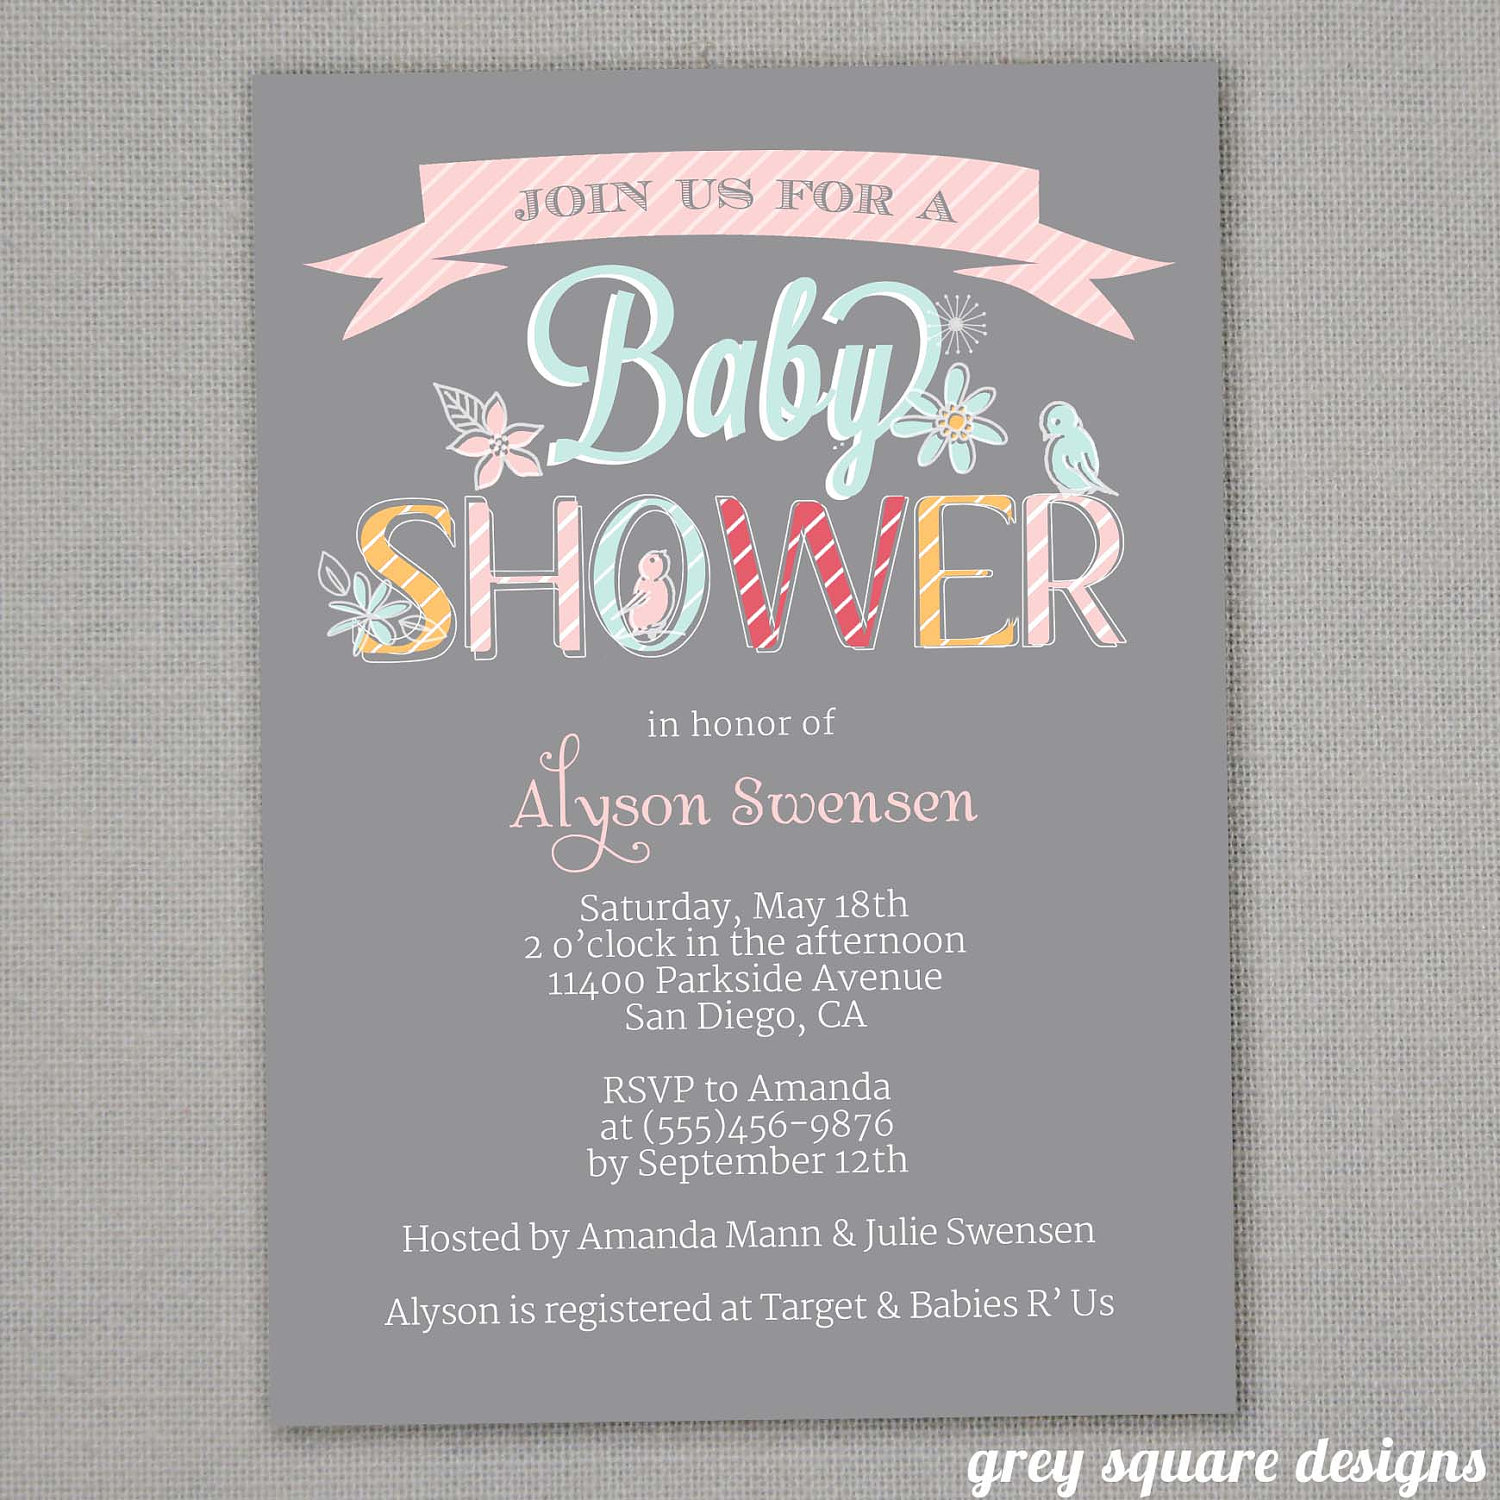 Full Size of Baby Shower:stylish Baby Shower Wishes Picture Inspirations Baby Shower Wreath With Baby Shower Gifts For Girls Plus Arreglos Para Baby Shower Together With Baby Shower Bingo As Well As Baby Shower Rentals